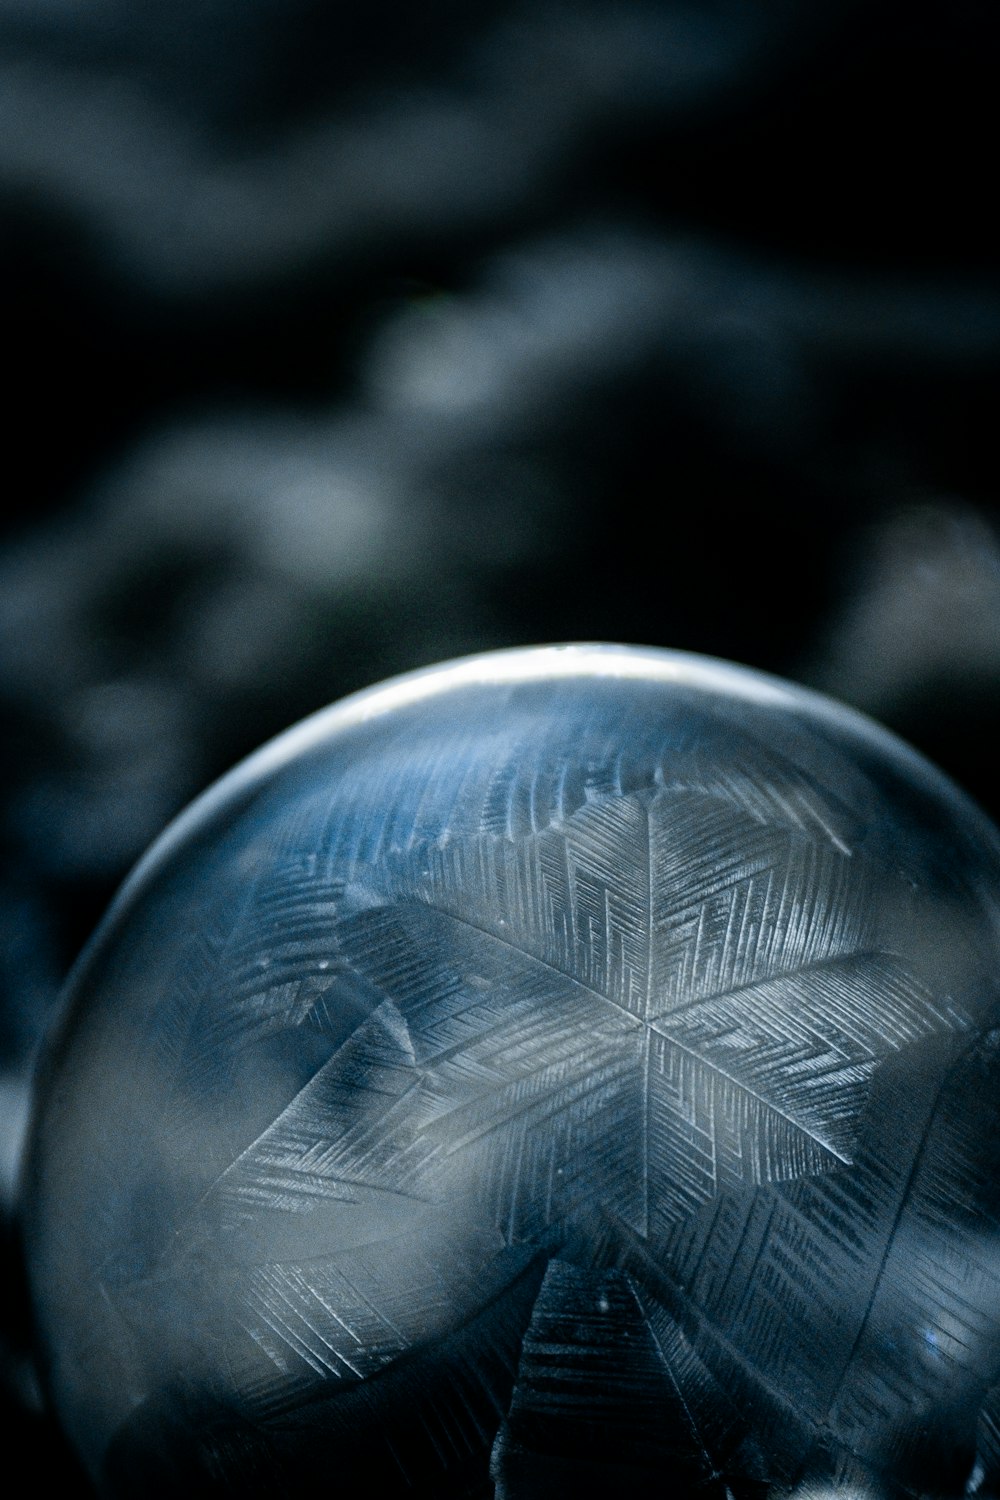 a glass ball with a snowflake design on it